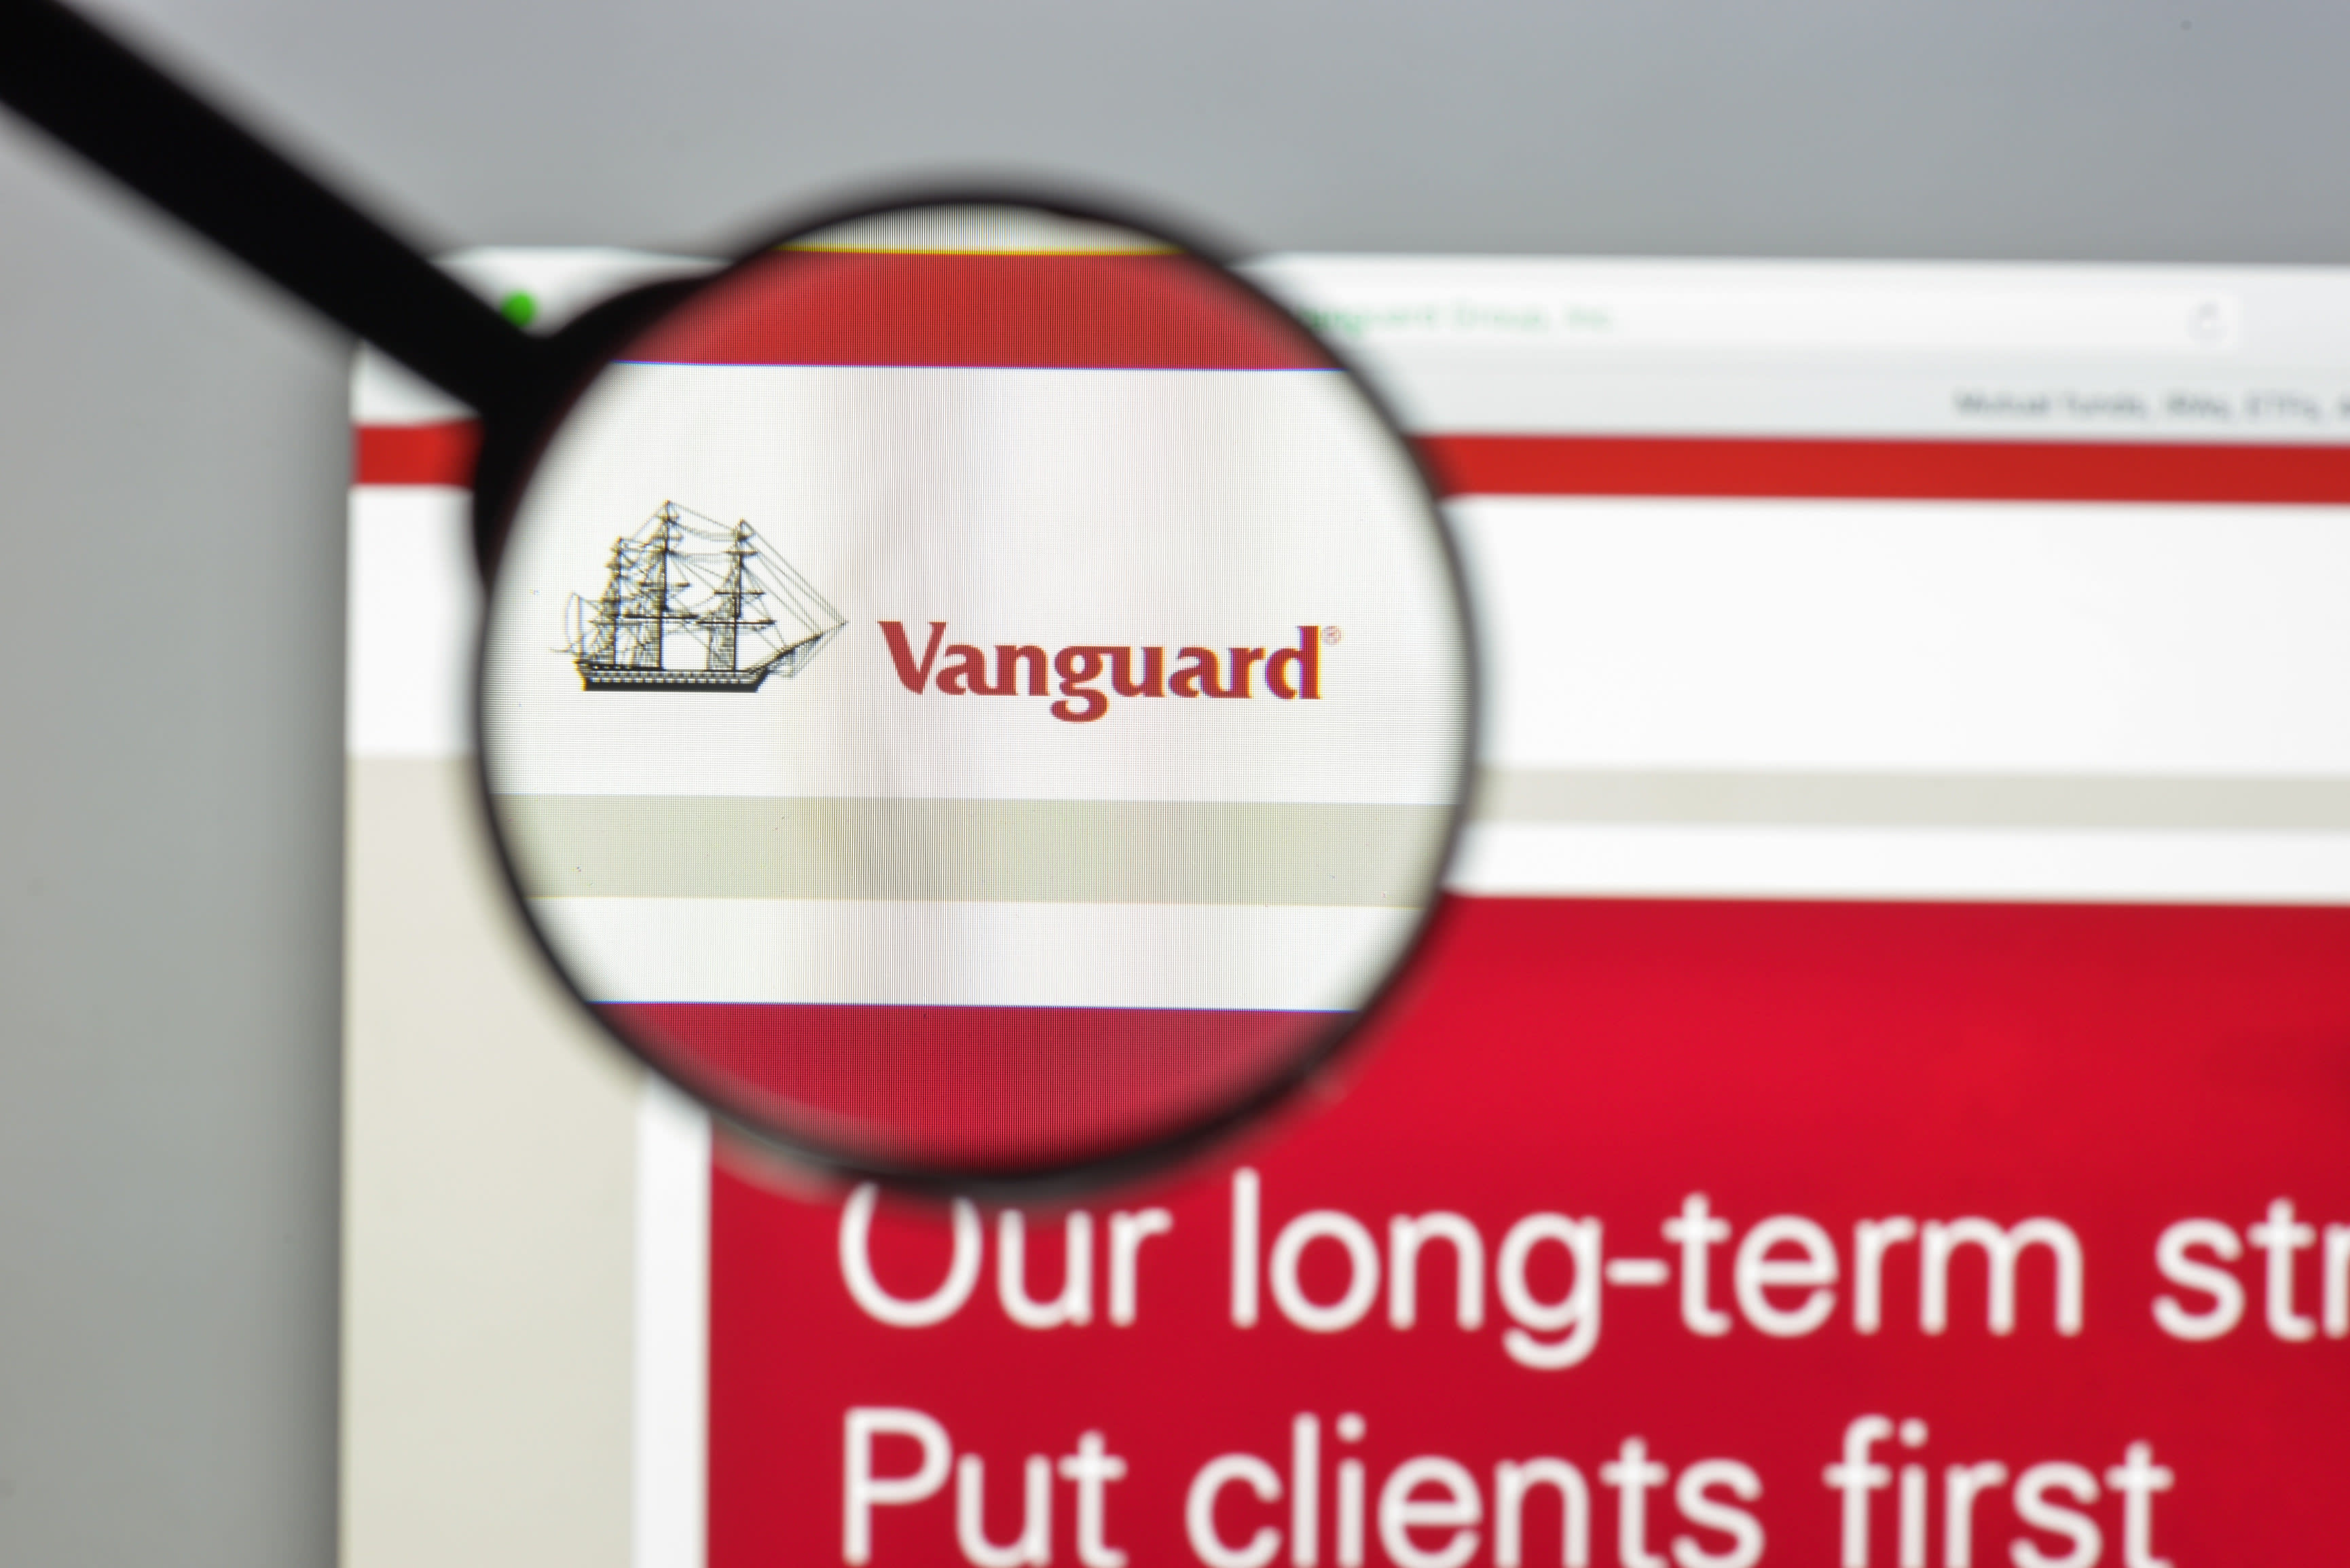 Vanguard new clients spike by 83% after UK advice launch